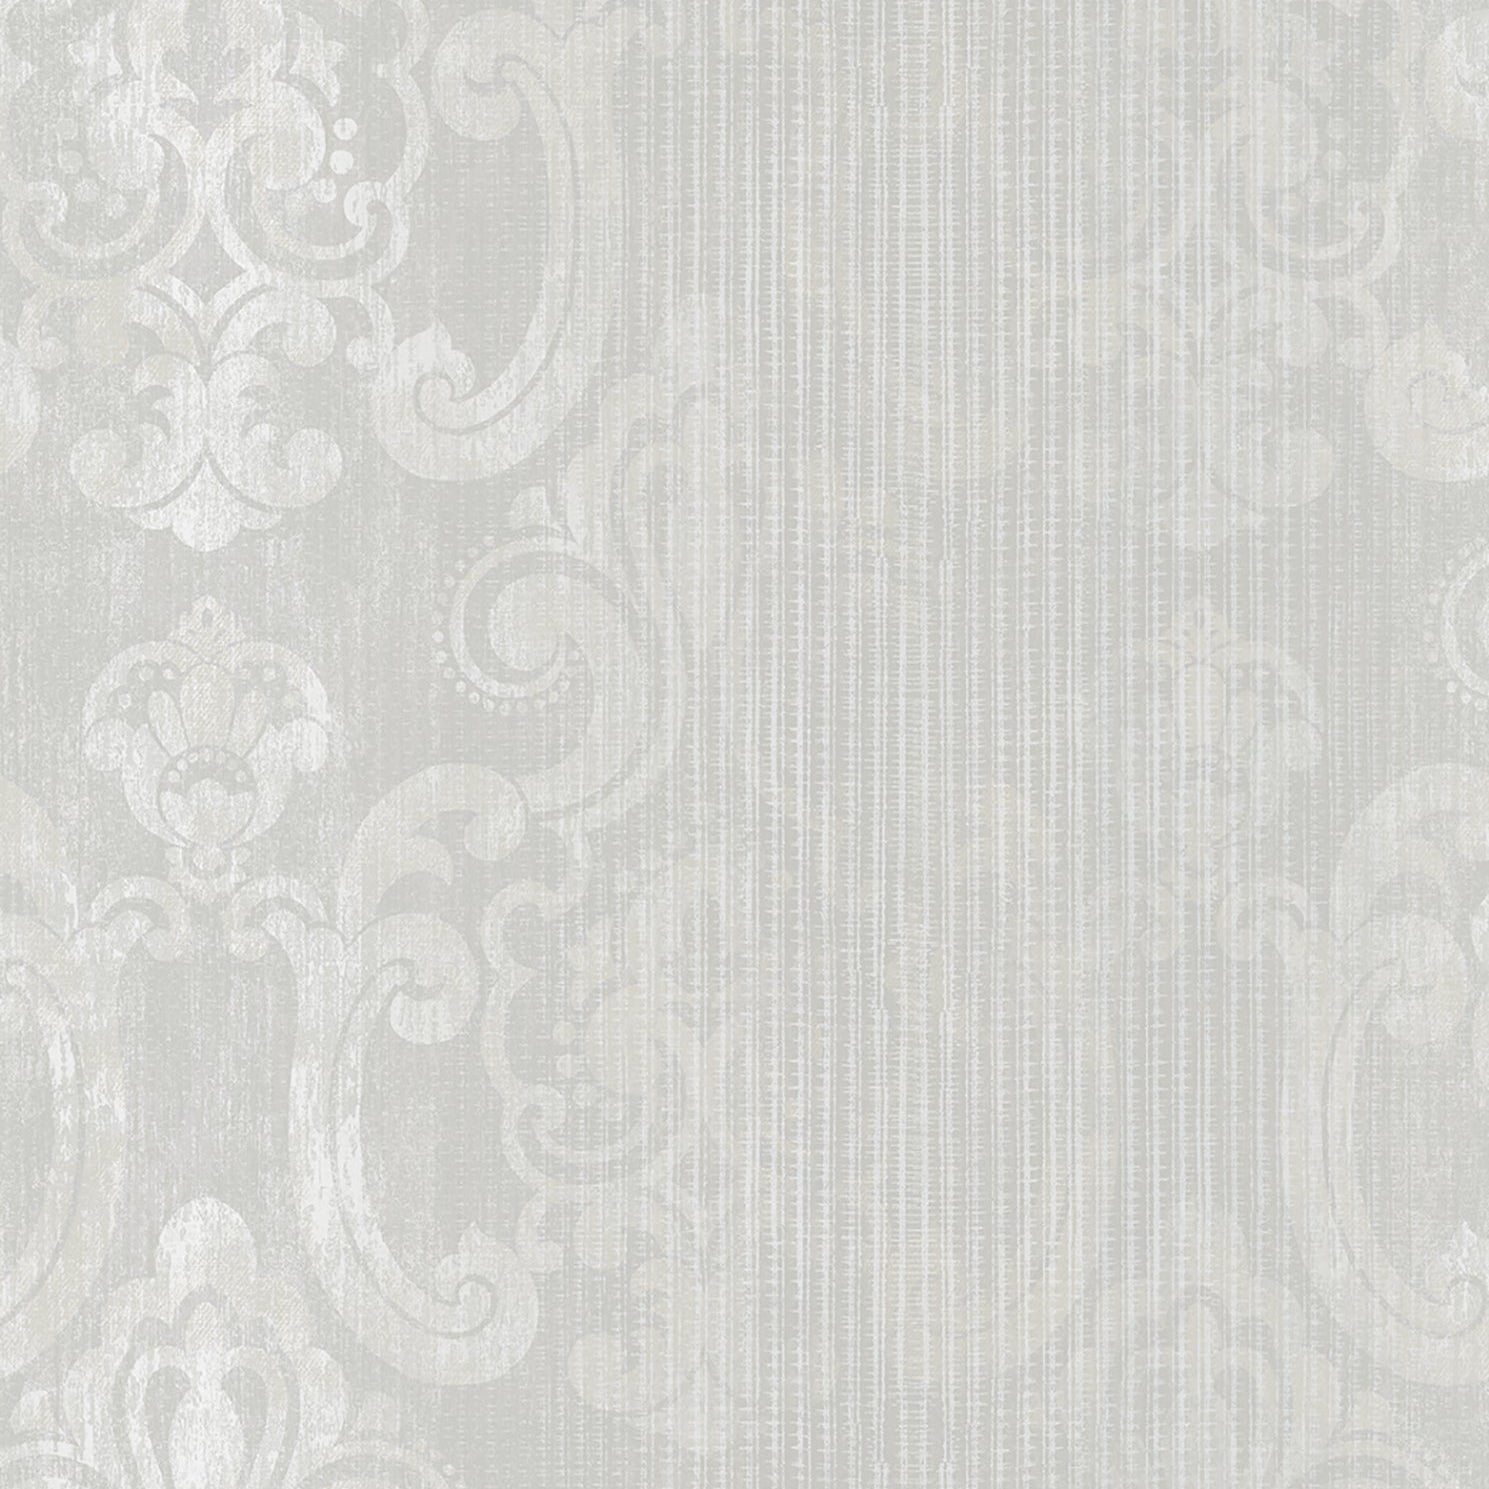 View 2810-SH01042 Tradition Ariana Striped Damask by Advantage